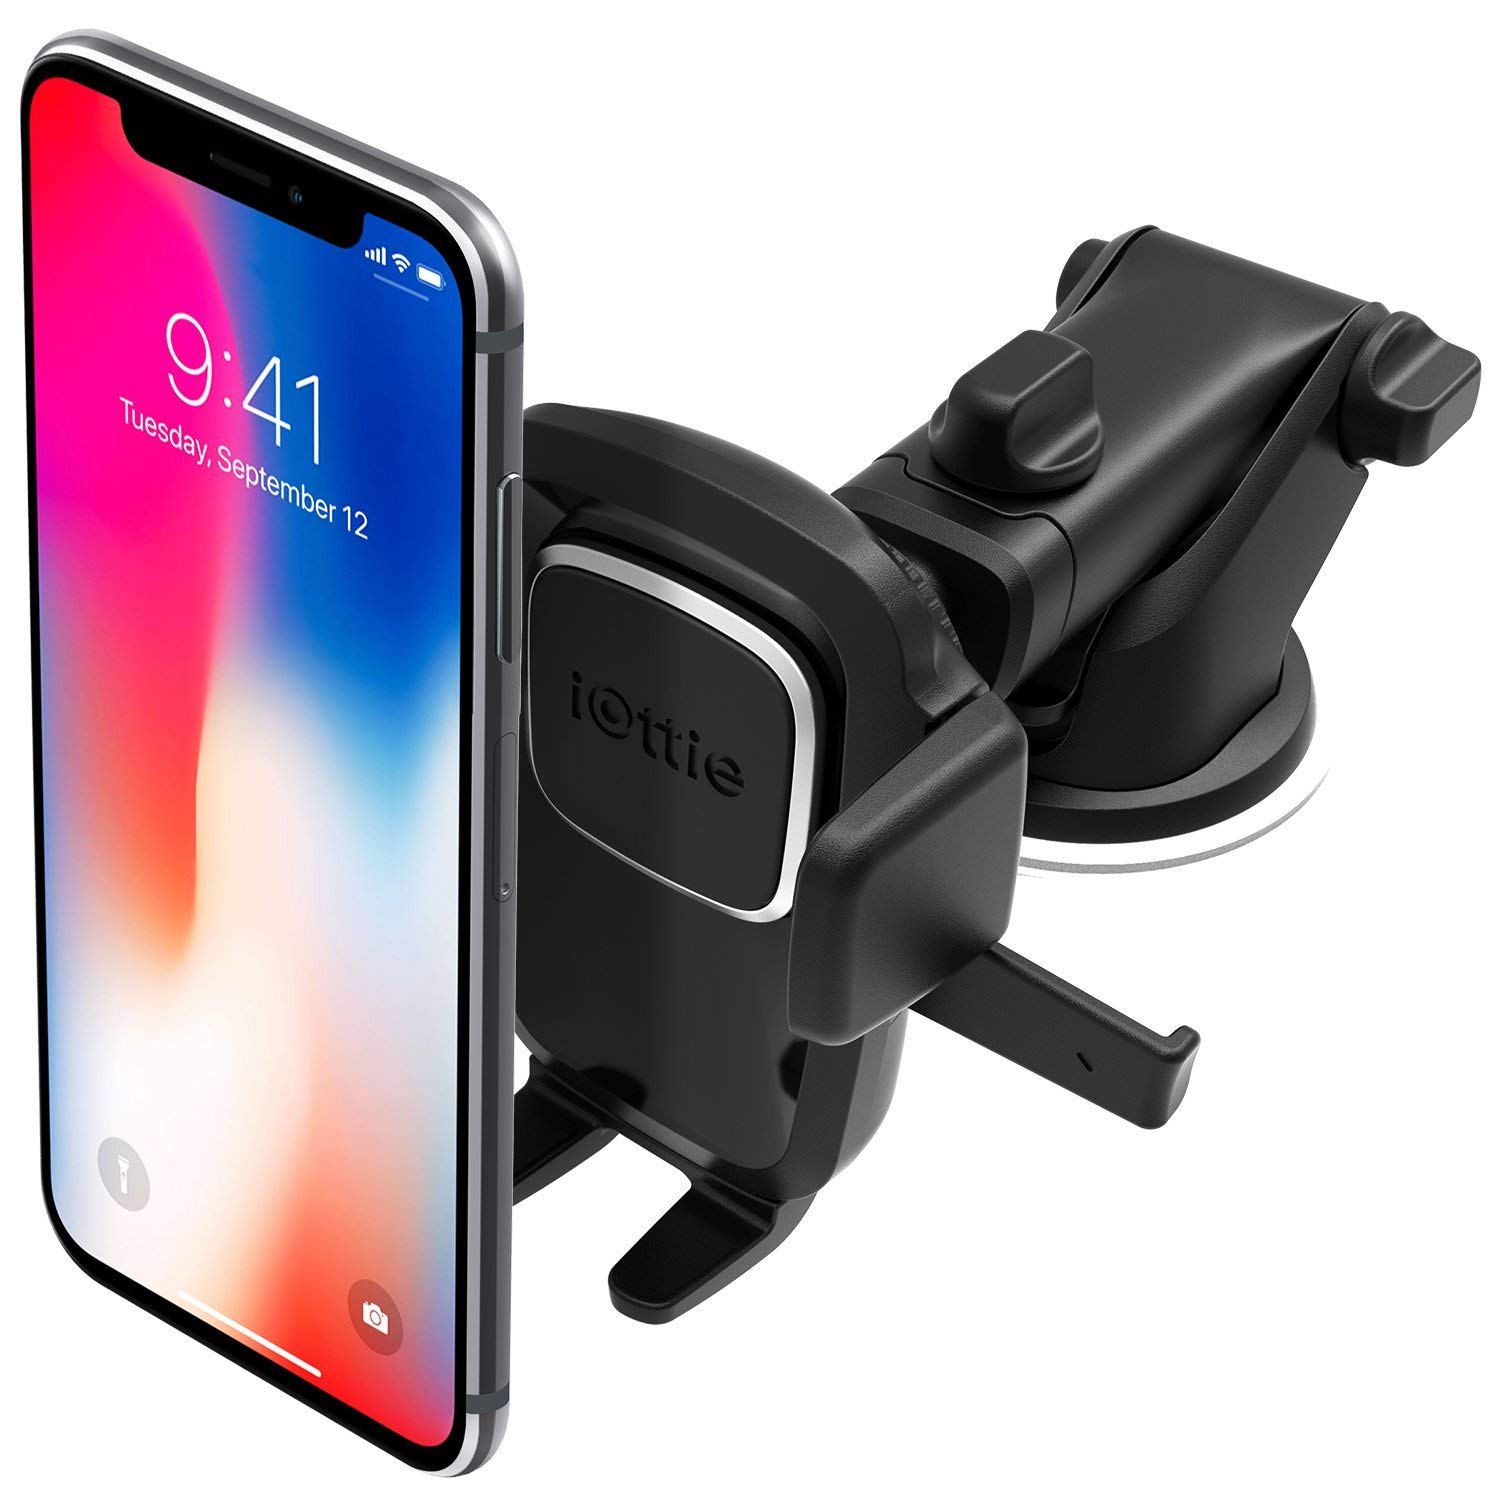 iOttie Easy One Touch 4 Dashboard & Windshield Car Phone Mount Holder for iPhone Xs Max R 8 Plus 7 6s SE Samsung Galaxy S9 S8 Edge S7 S6 Note 9 &a 2